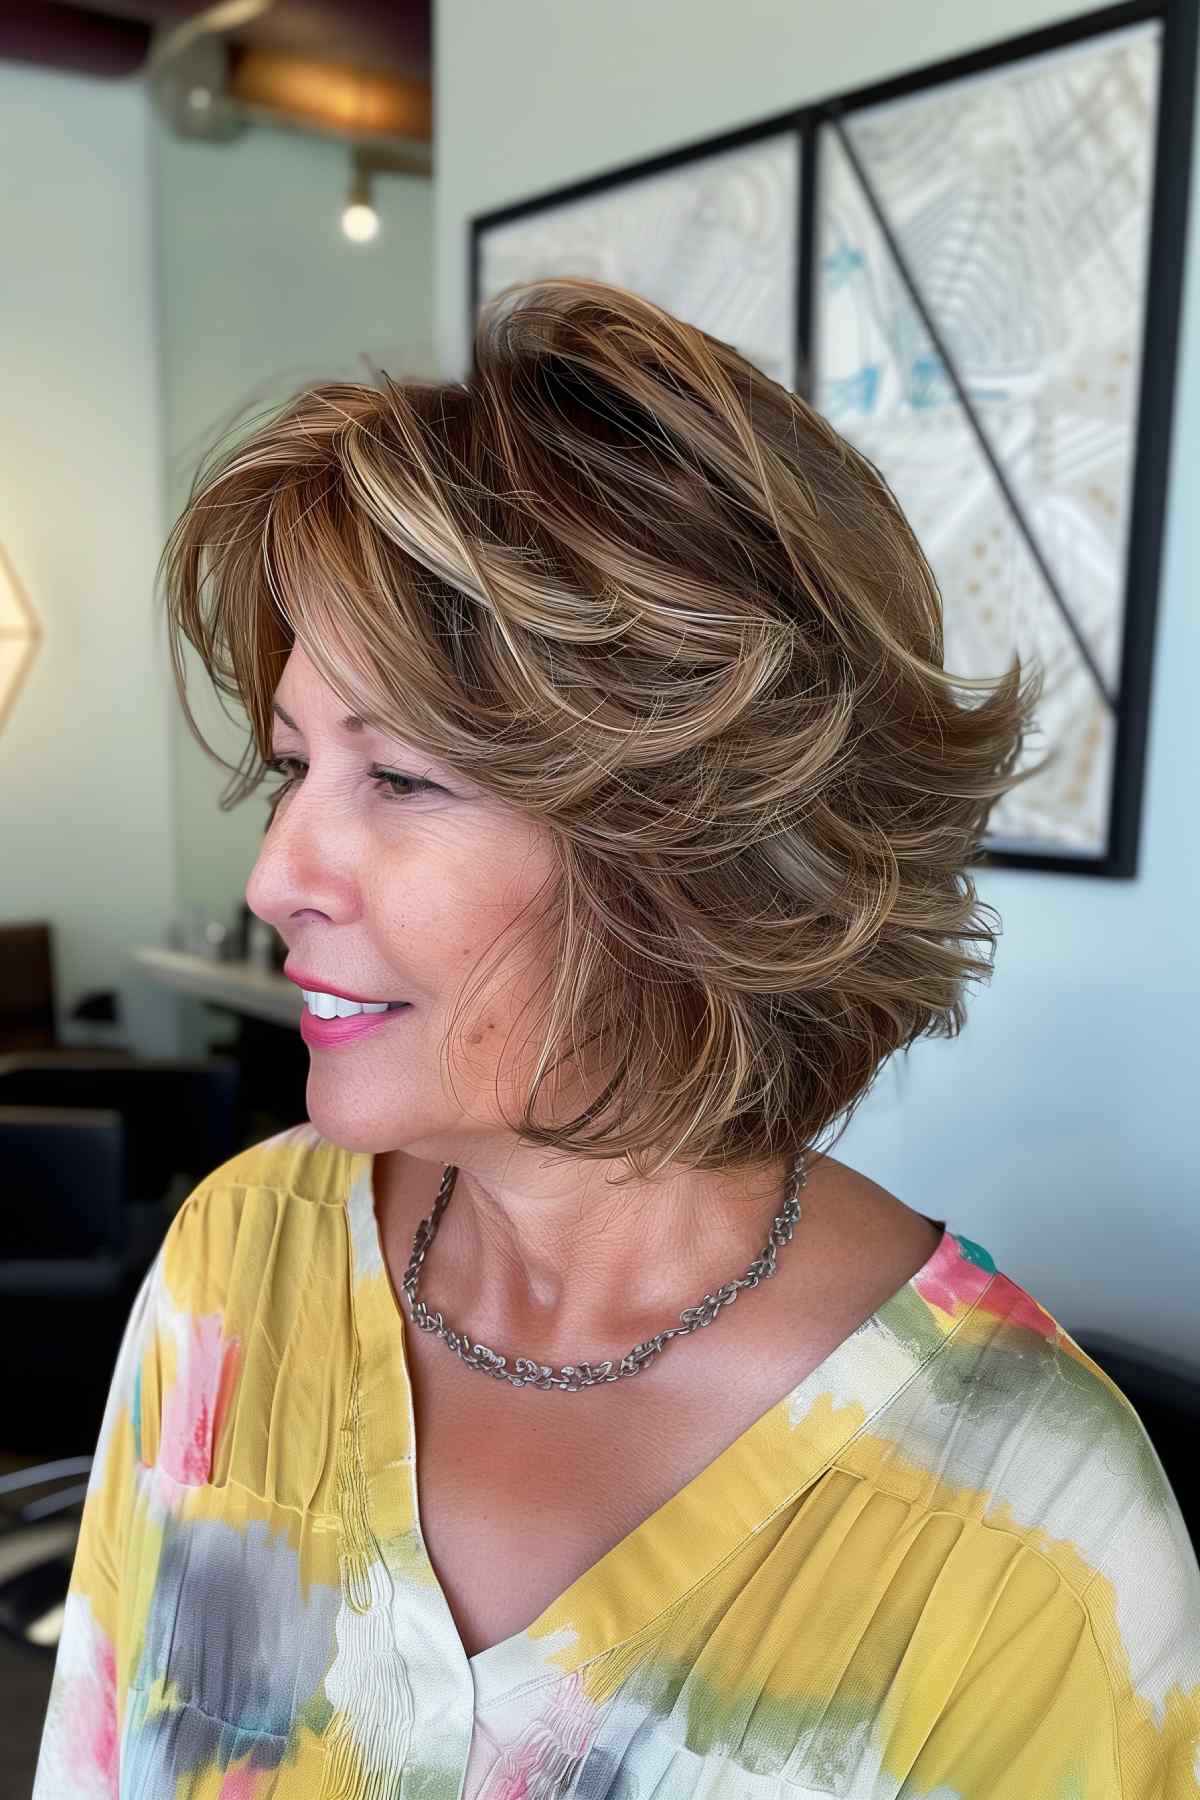 The woman rocked a layered bob with a bold flip and warm caramel highlights.